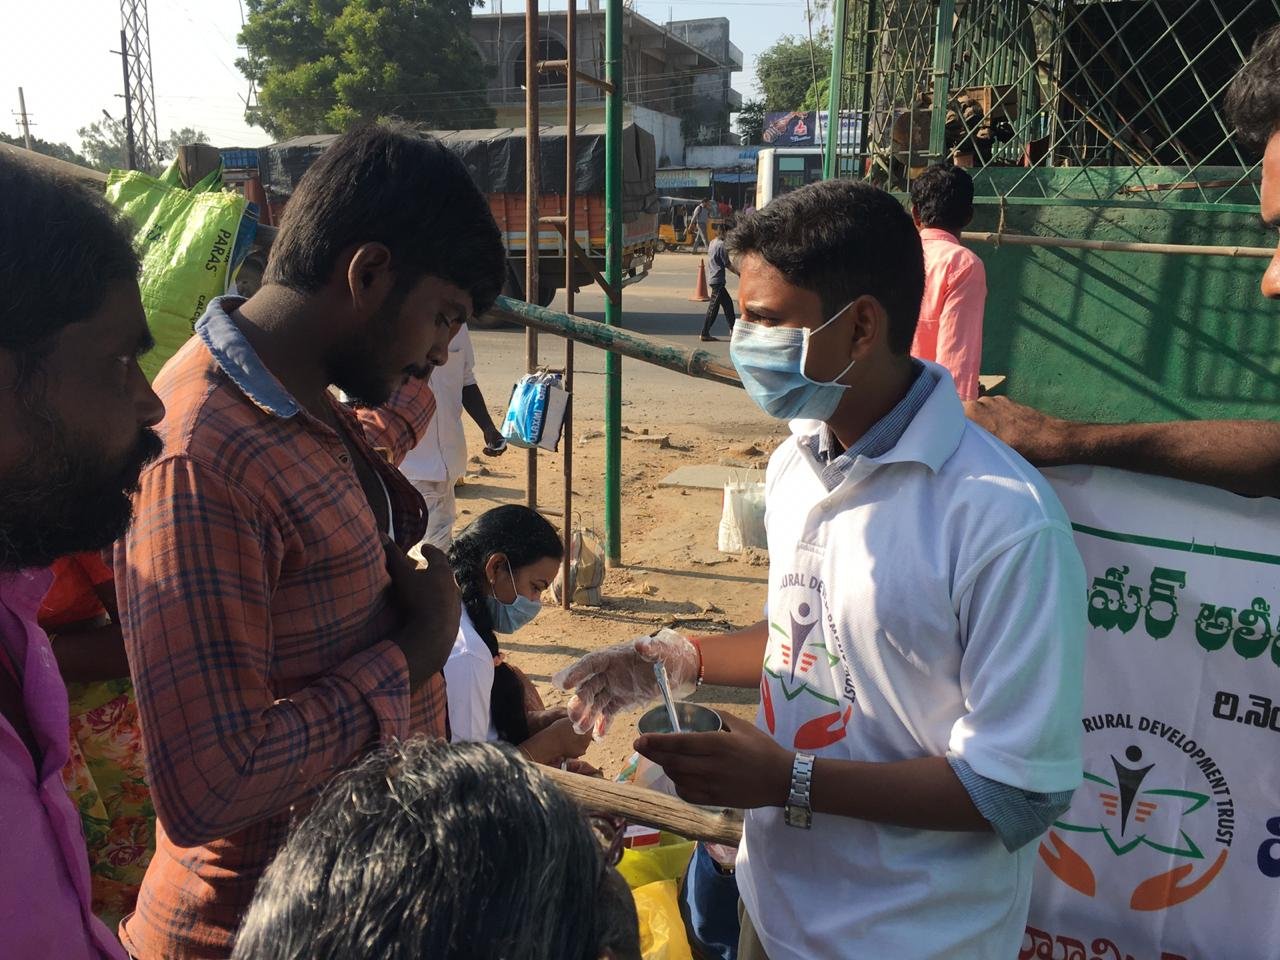 On 6th October 2019 UARDT Hyderabad conducted Free Homeo medical camp and given preventive medicine for dengue, chickenguenea etc., in following locations Jeedimetla, BHEL, KPBHB, LB Nagar Metro, Vanastalipuram, JBS, Secunderabad Railway Station etc.,. Total non-members benefited with this medical camp are 1,50,000.